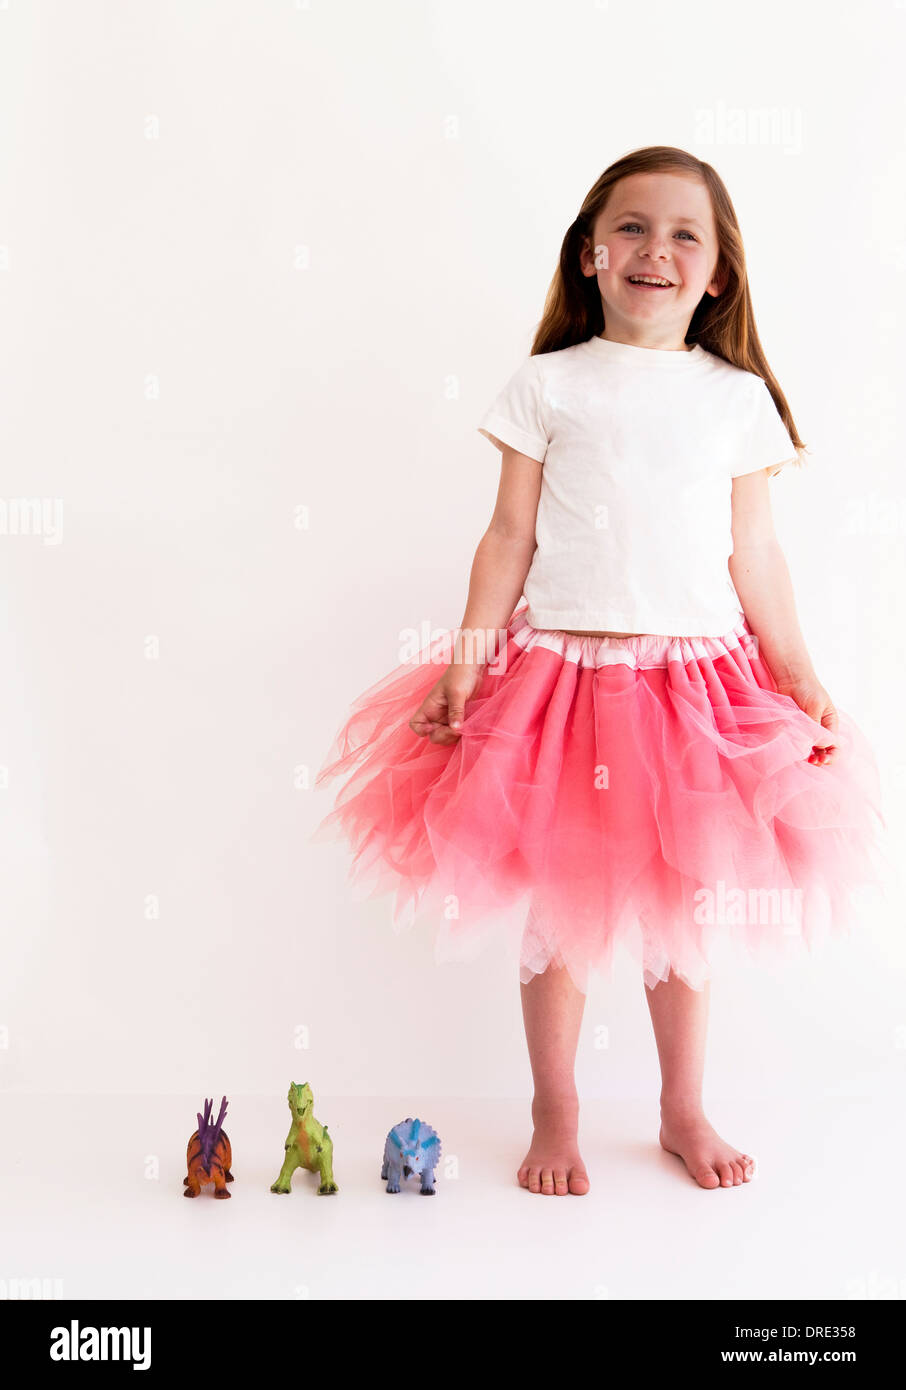 Girl in tutu with toy dinosaurs Stock Photo